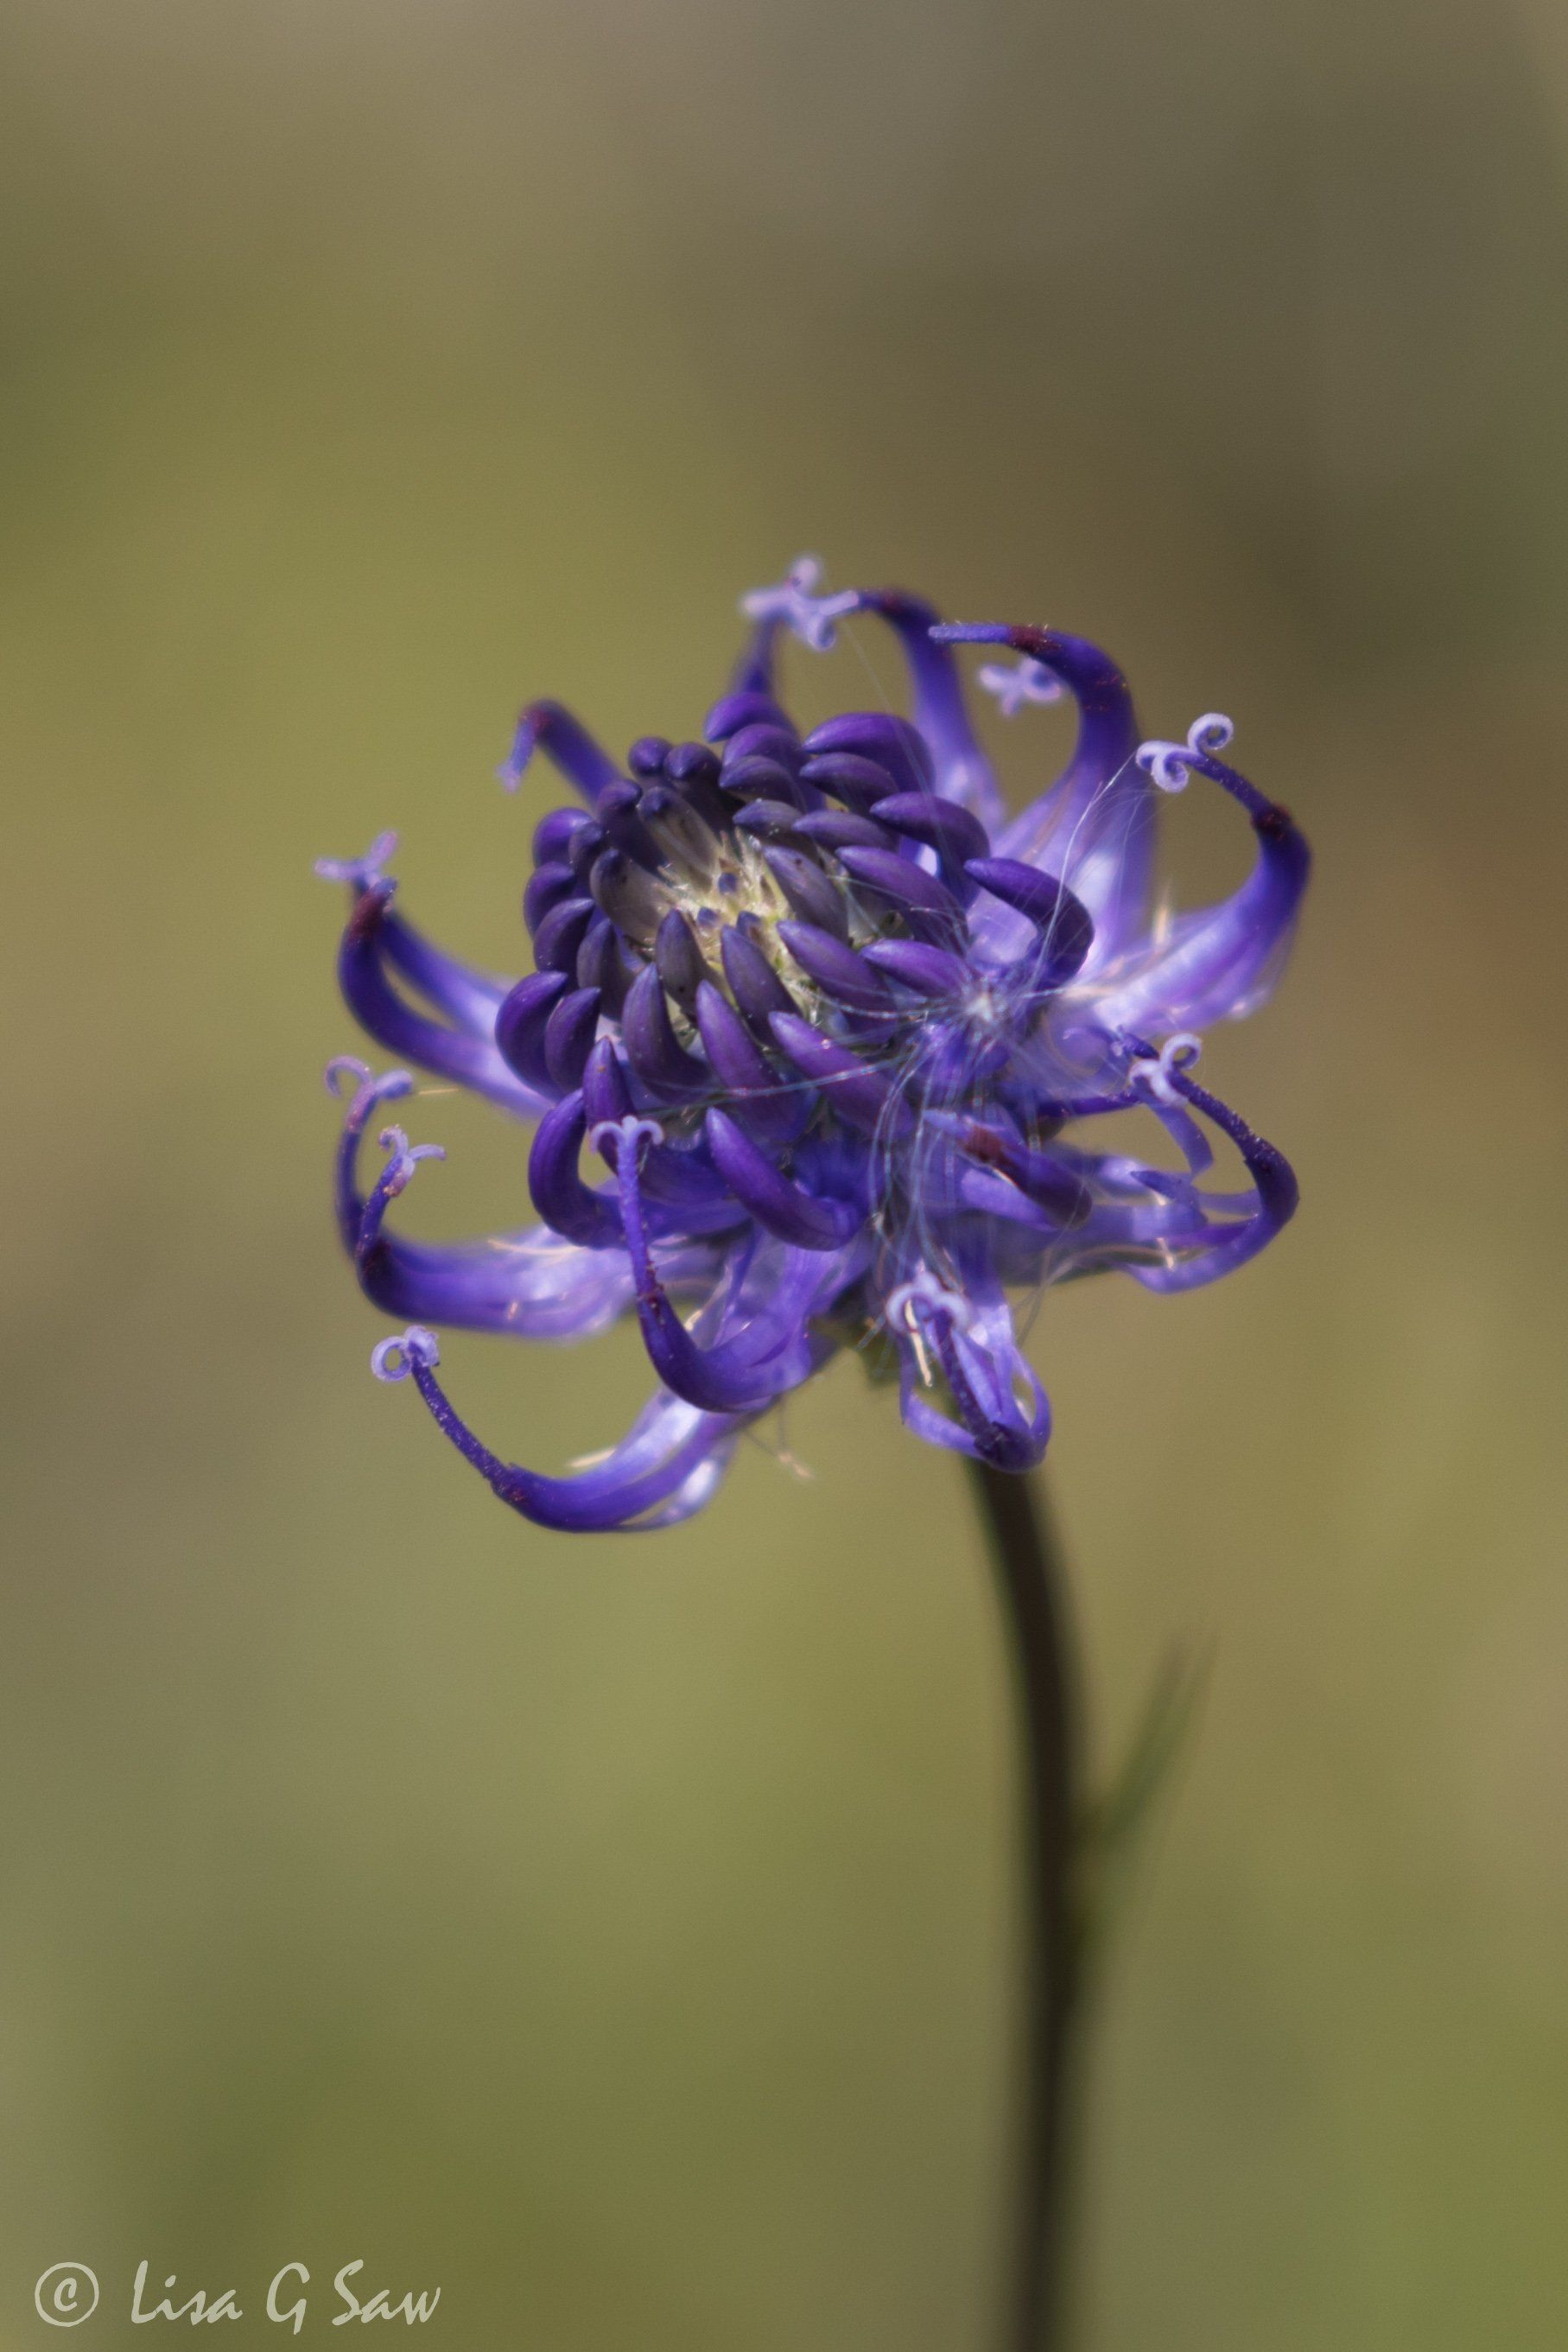 The Pride of Sussex, Rounded-Headed Rampion